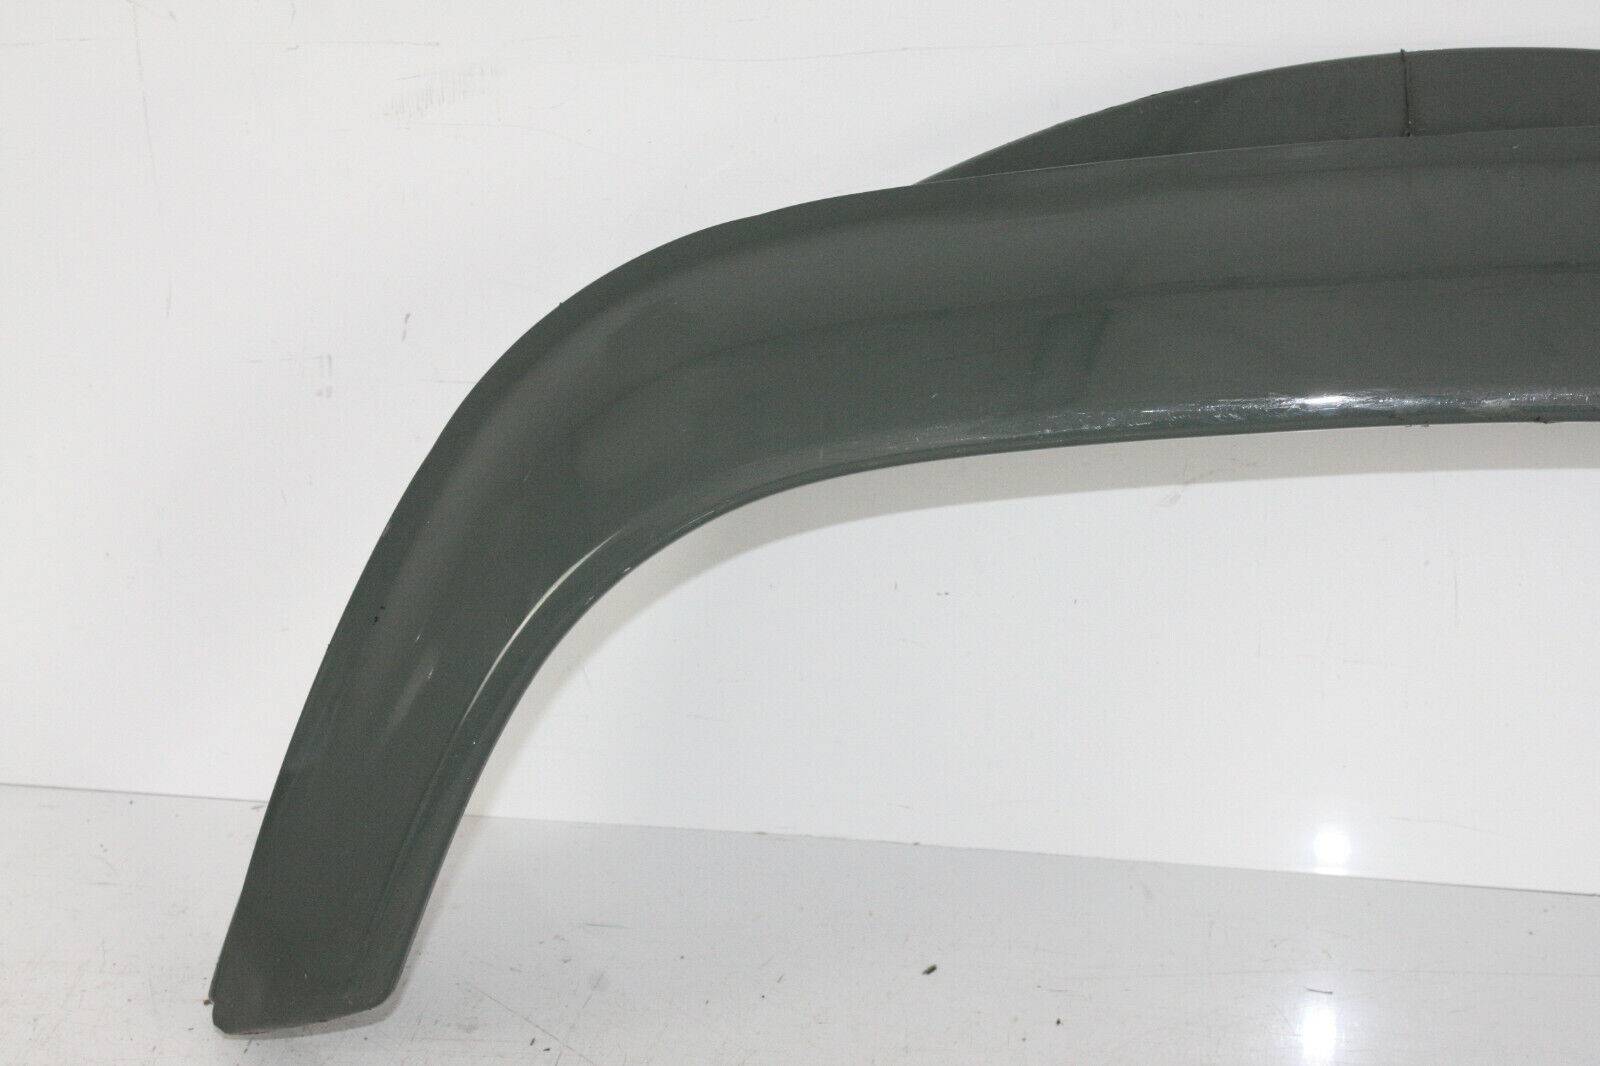 Land-Rover-Defender-Wheel-Arch-Flare-Spat-Front-Left-Painted-Type-Genuine-175367529954-2